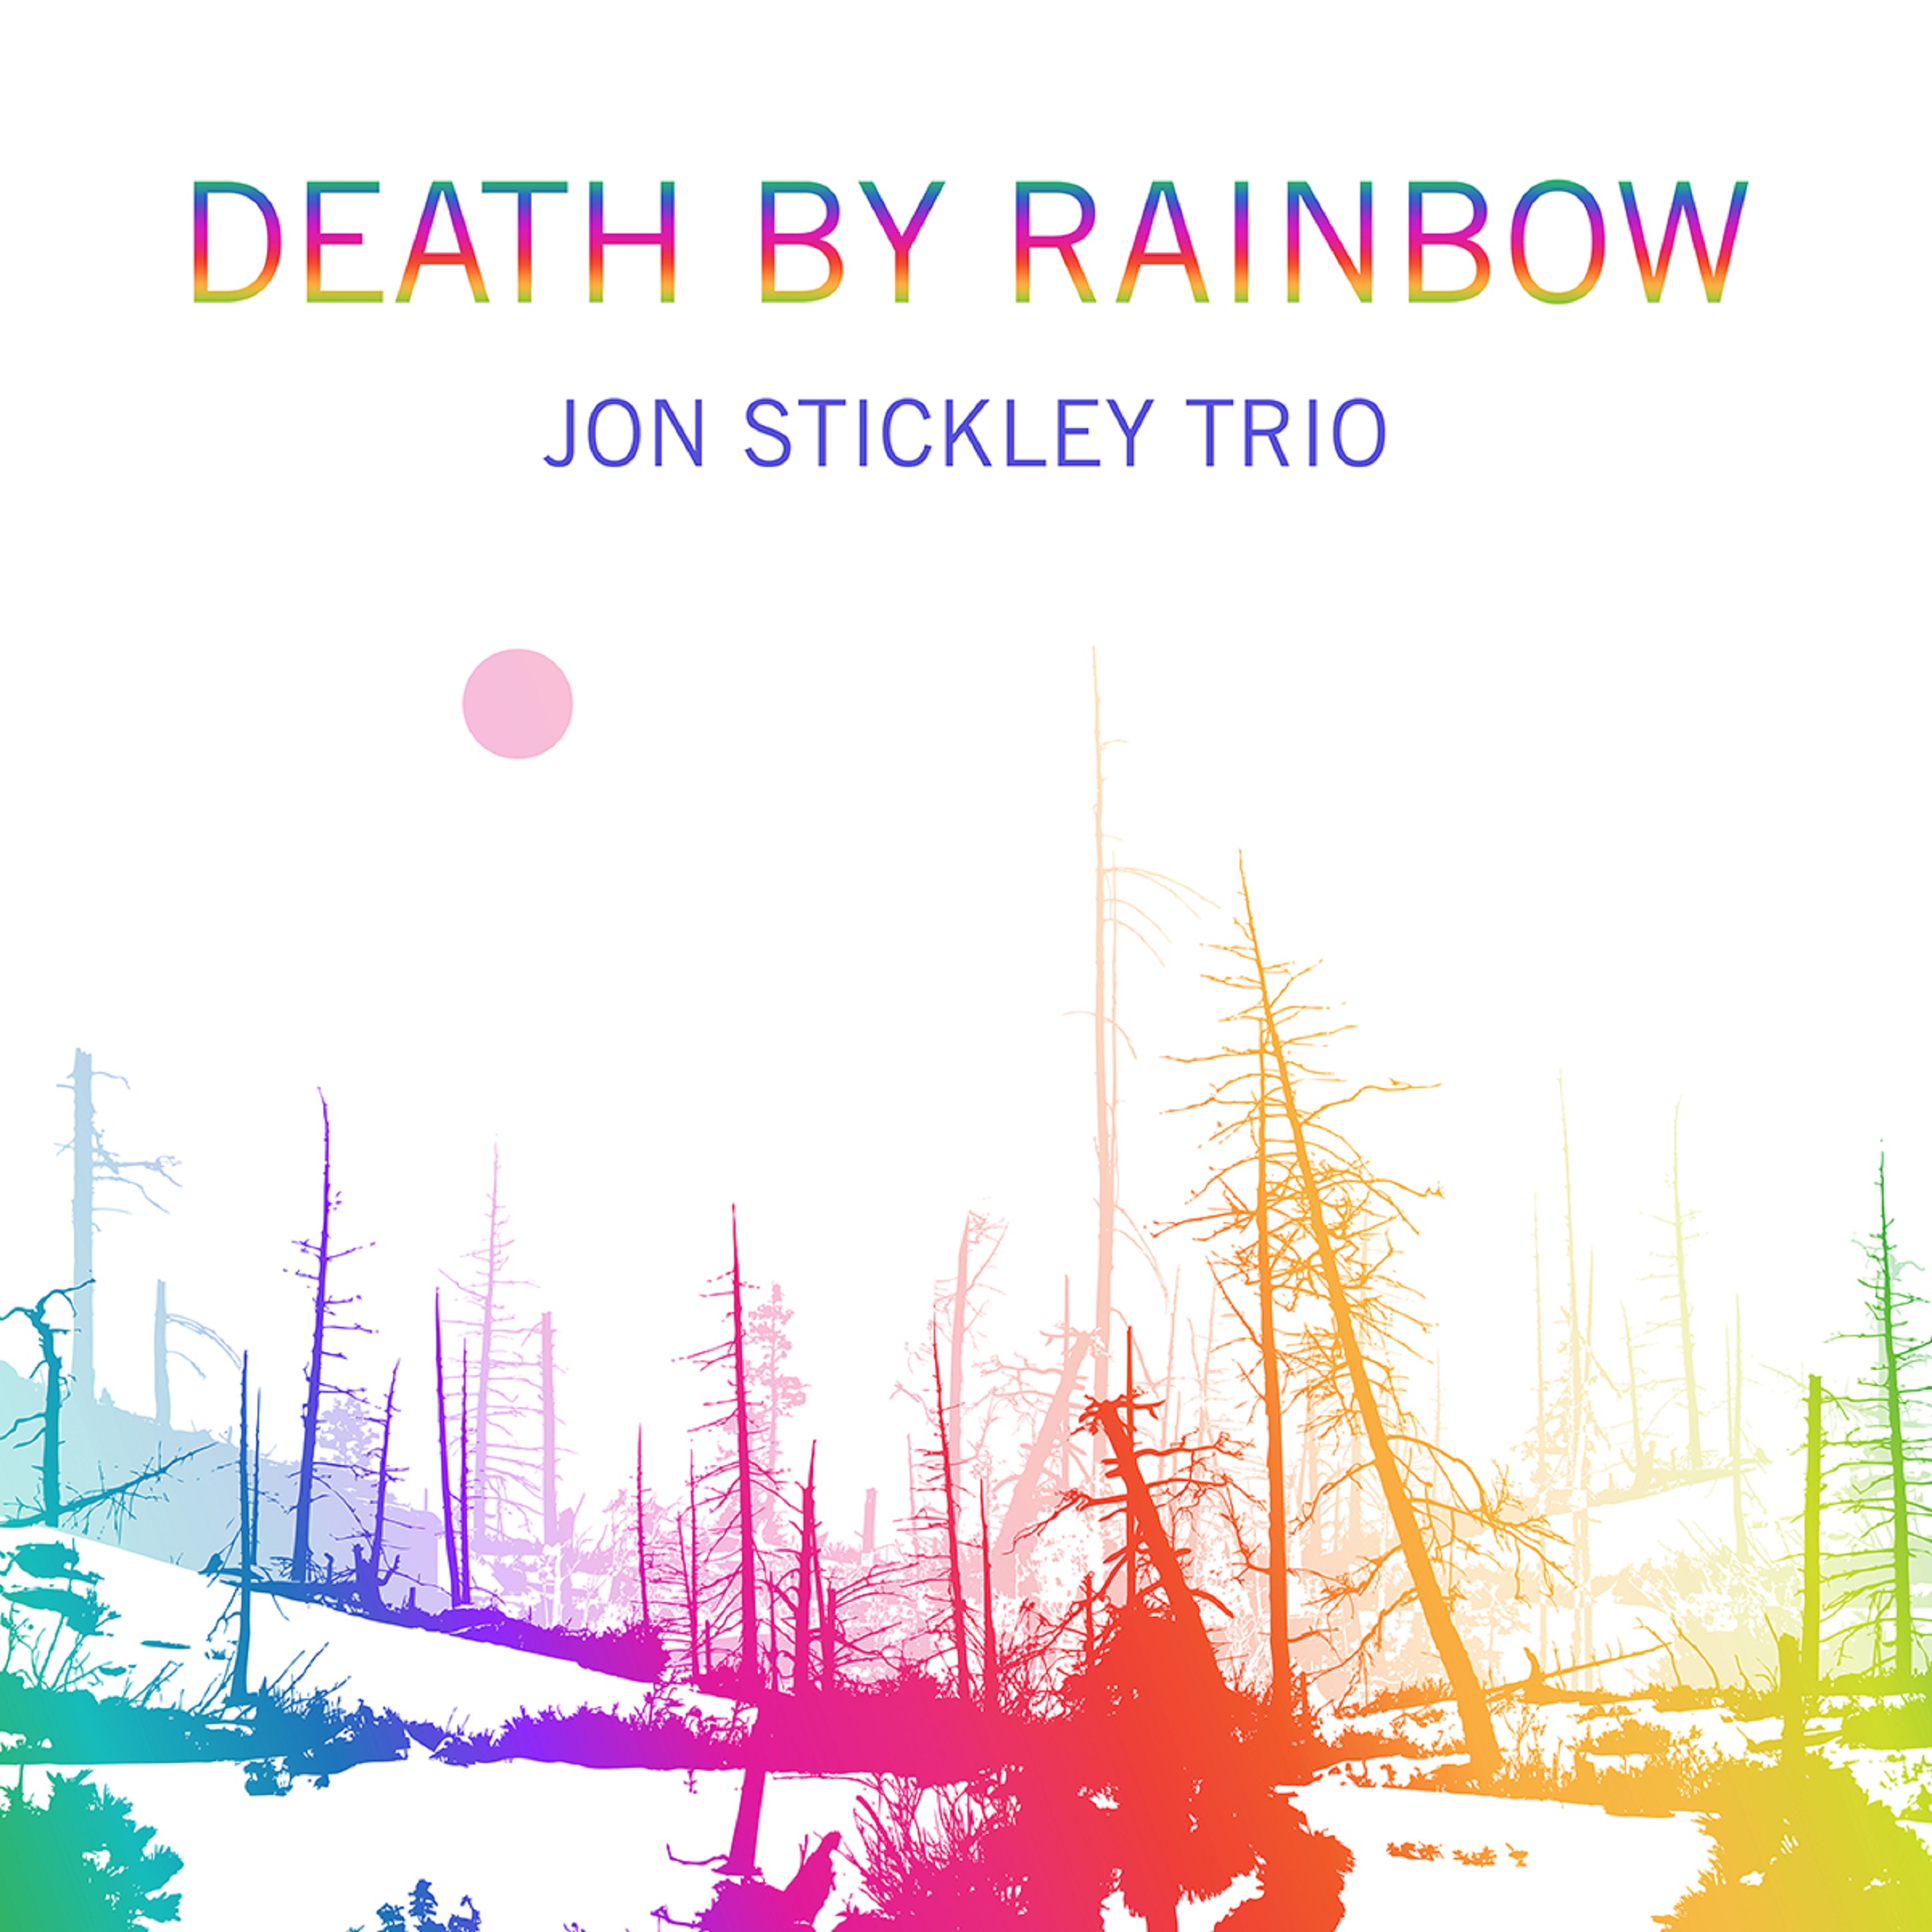 Jon Stickley Trio's "Death By Rainbow" explores the beauty and danger of nature